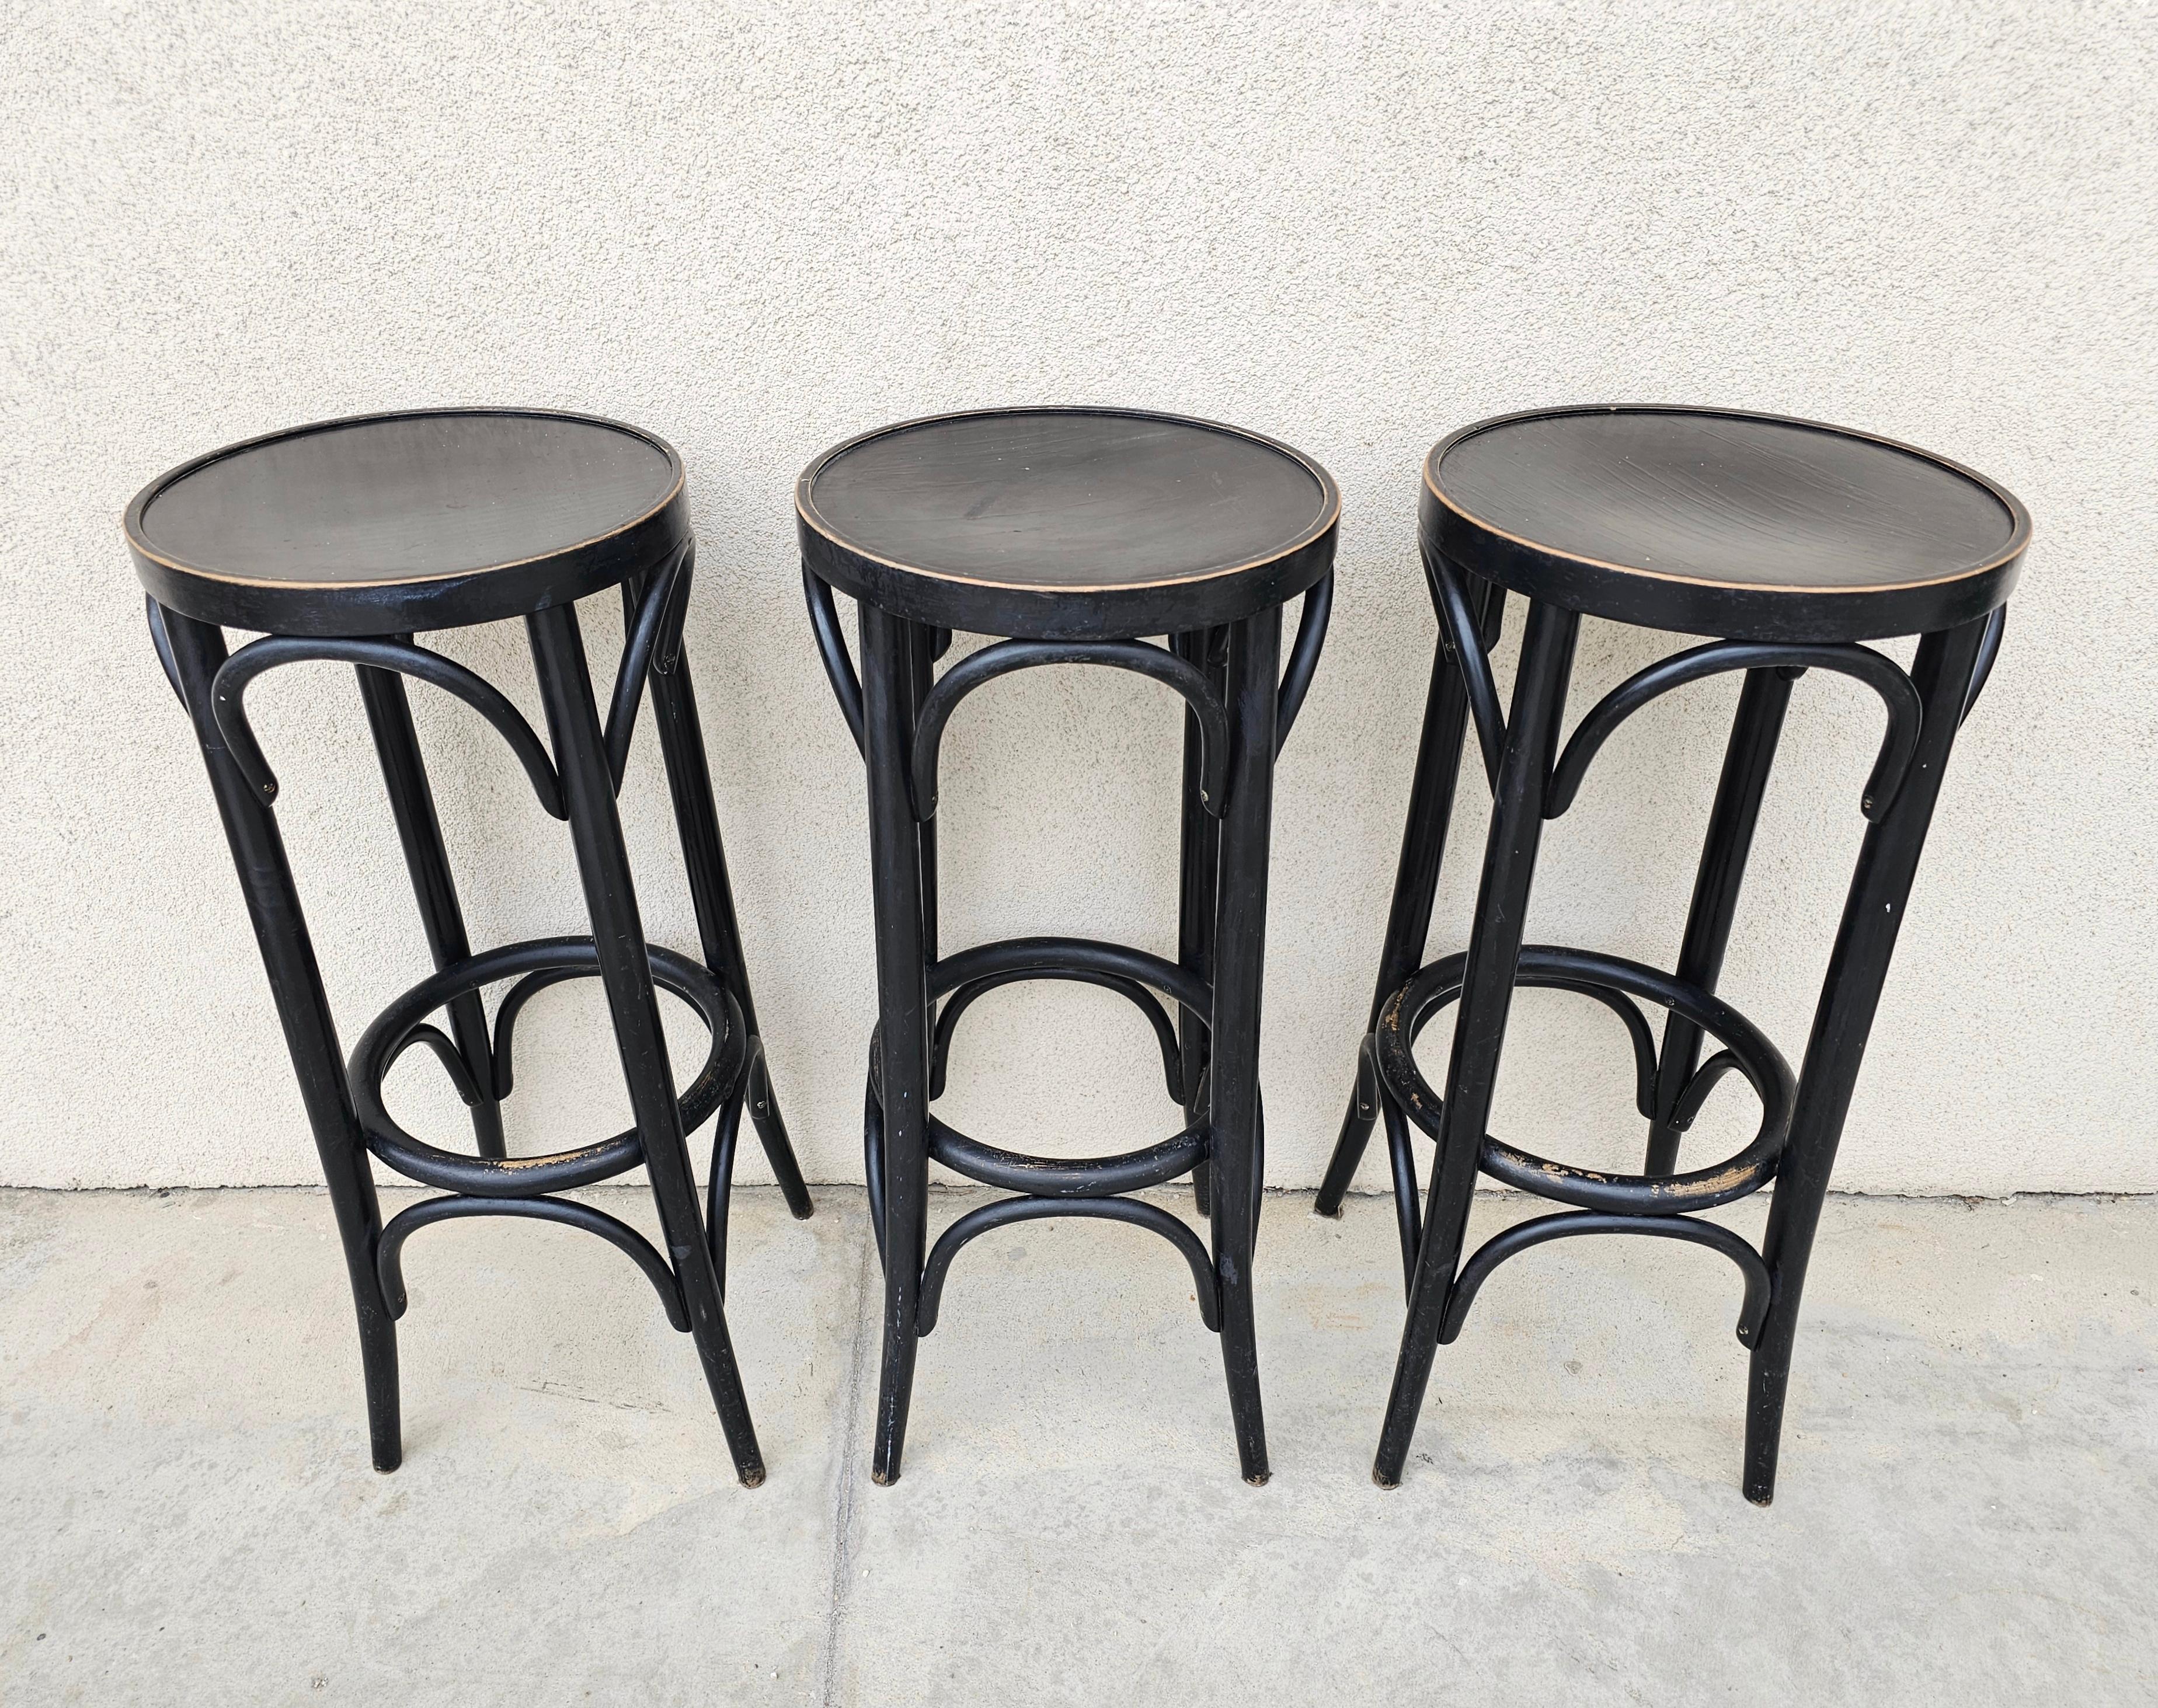 In this listing you will find vintage bar stools done in Beech Bentwood, manufactured by Mundus. Chairs are painted in dark brown, nearly black colour. Made in Yugoslavia in 1970s.

Bar stools are in good vintage condition with some signs of time